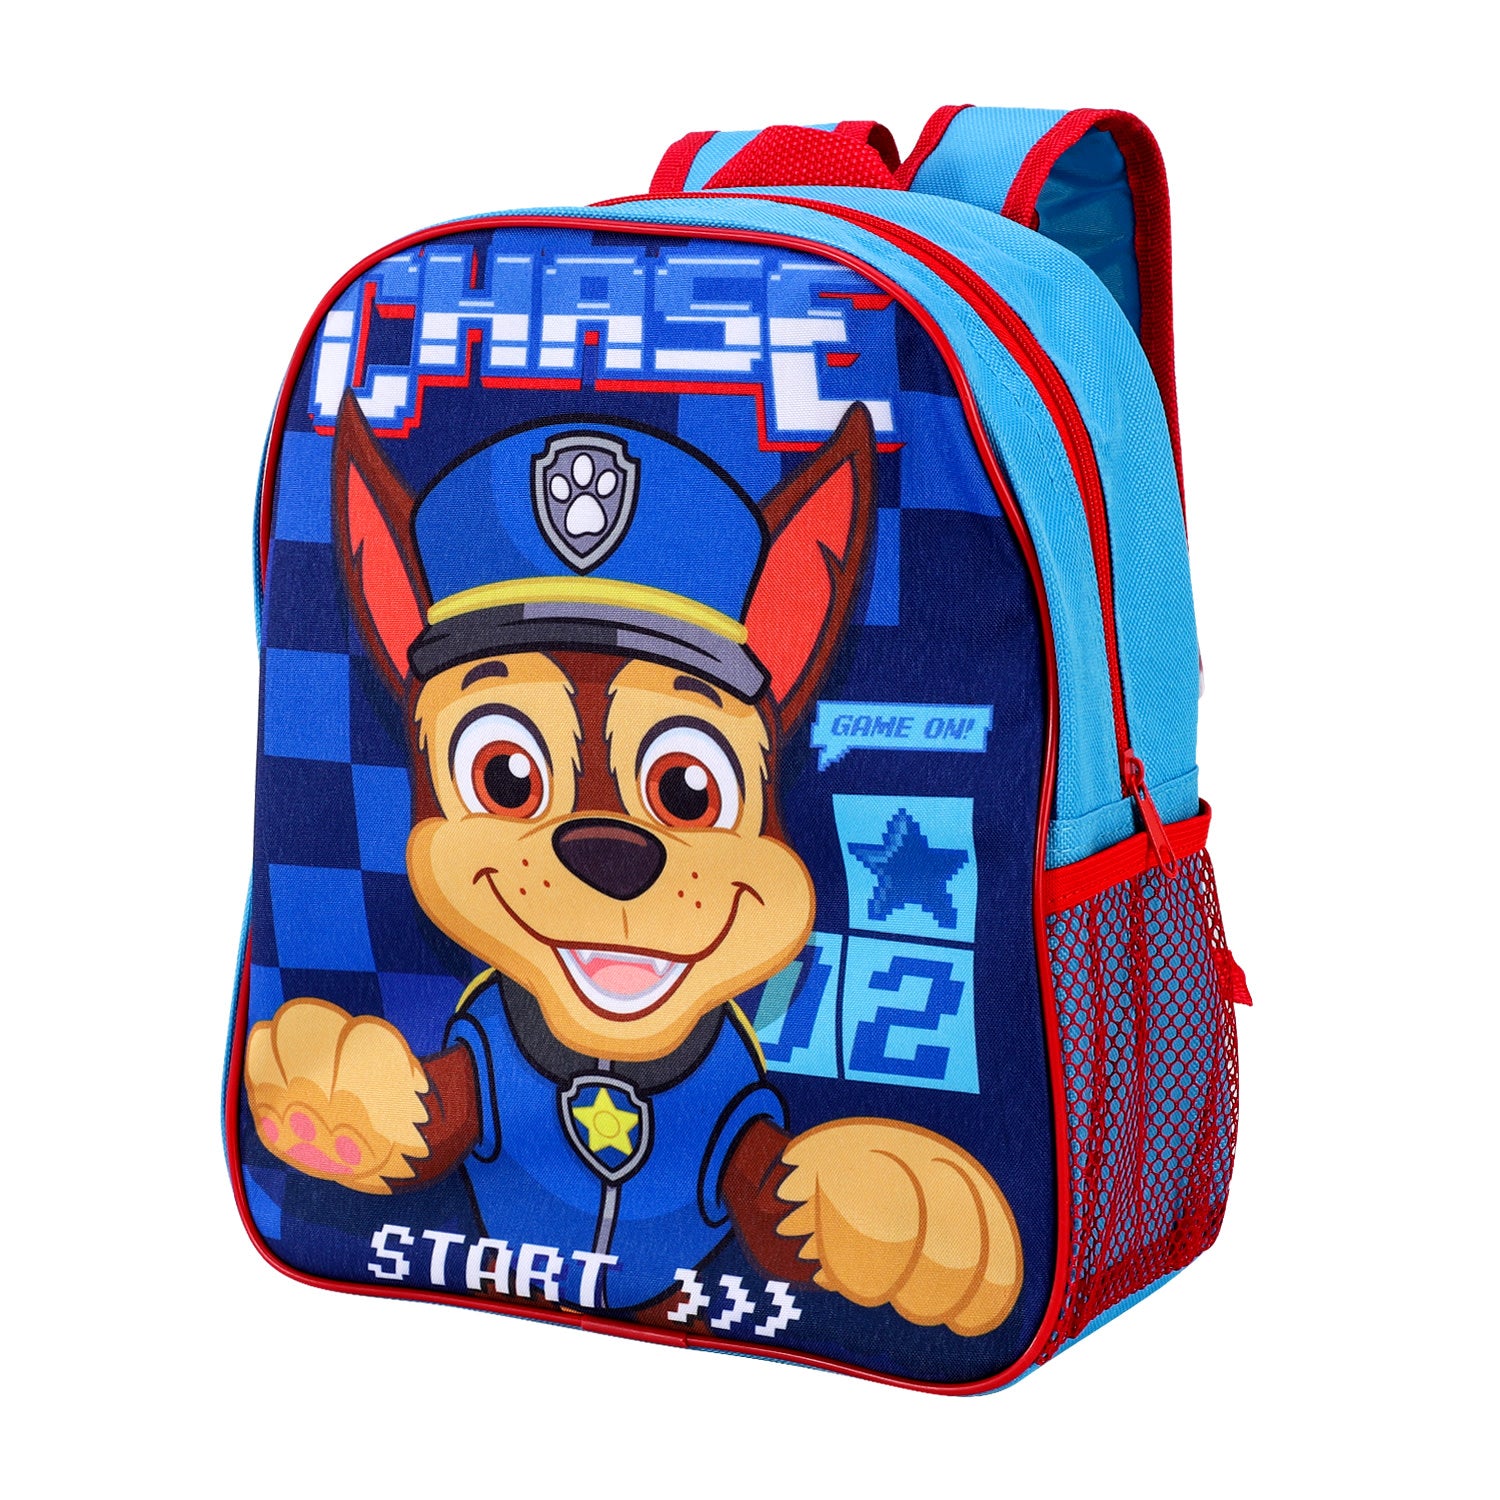 Paw Patrol 'Chase' Canvas Backpack